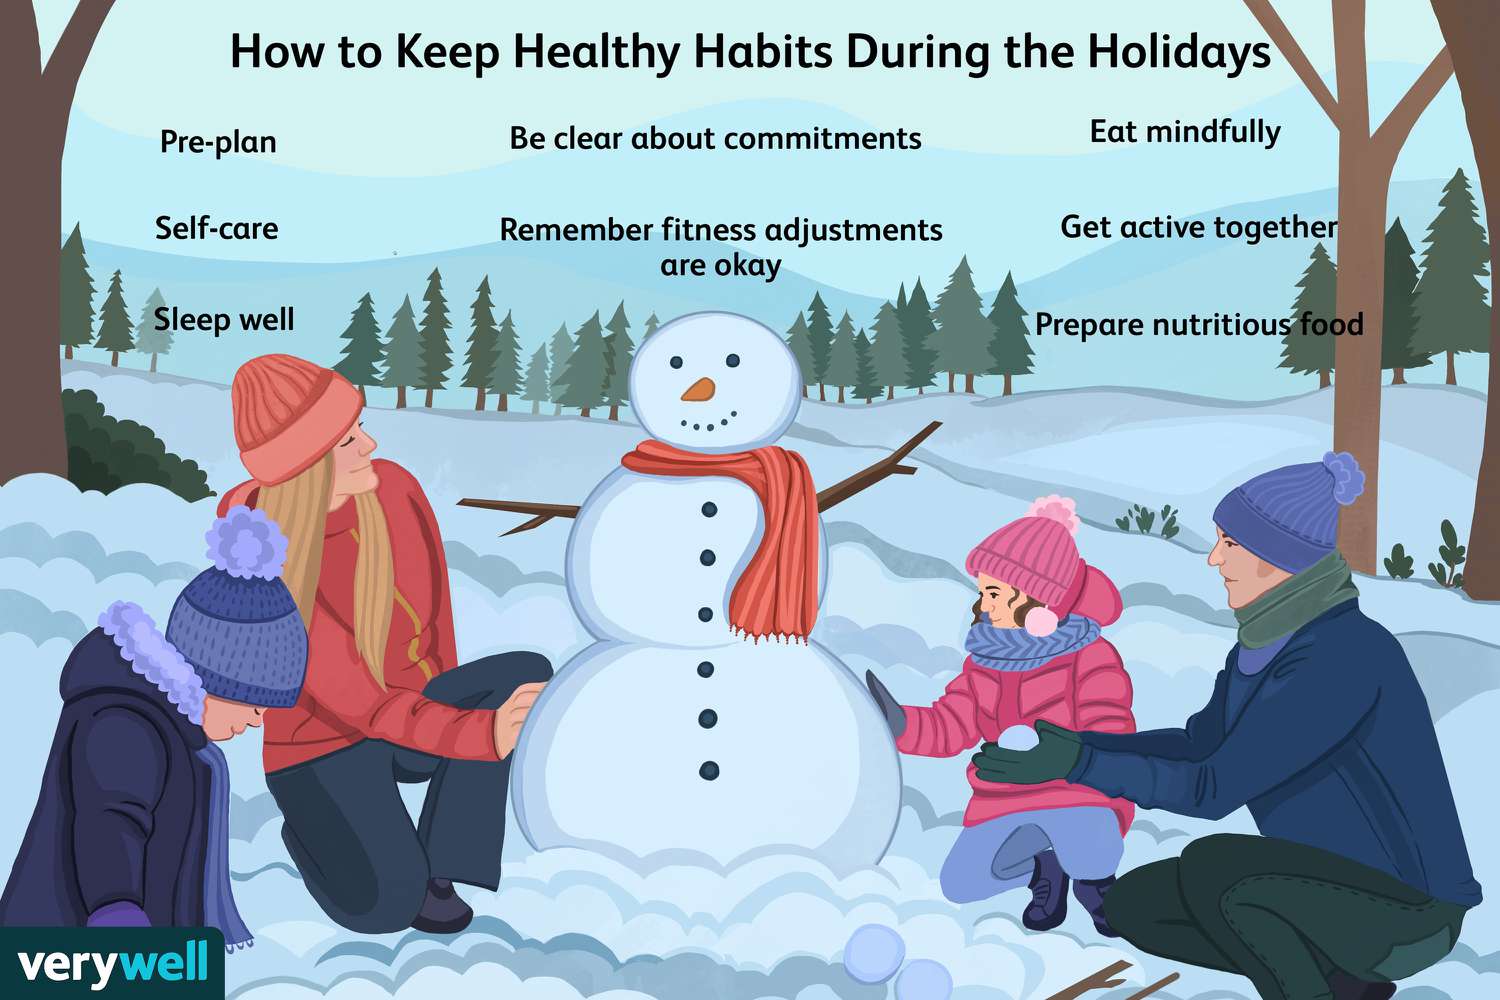 Tips for Maintaining Healthy Habits During the Holidays